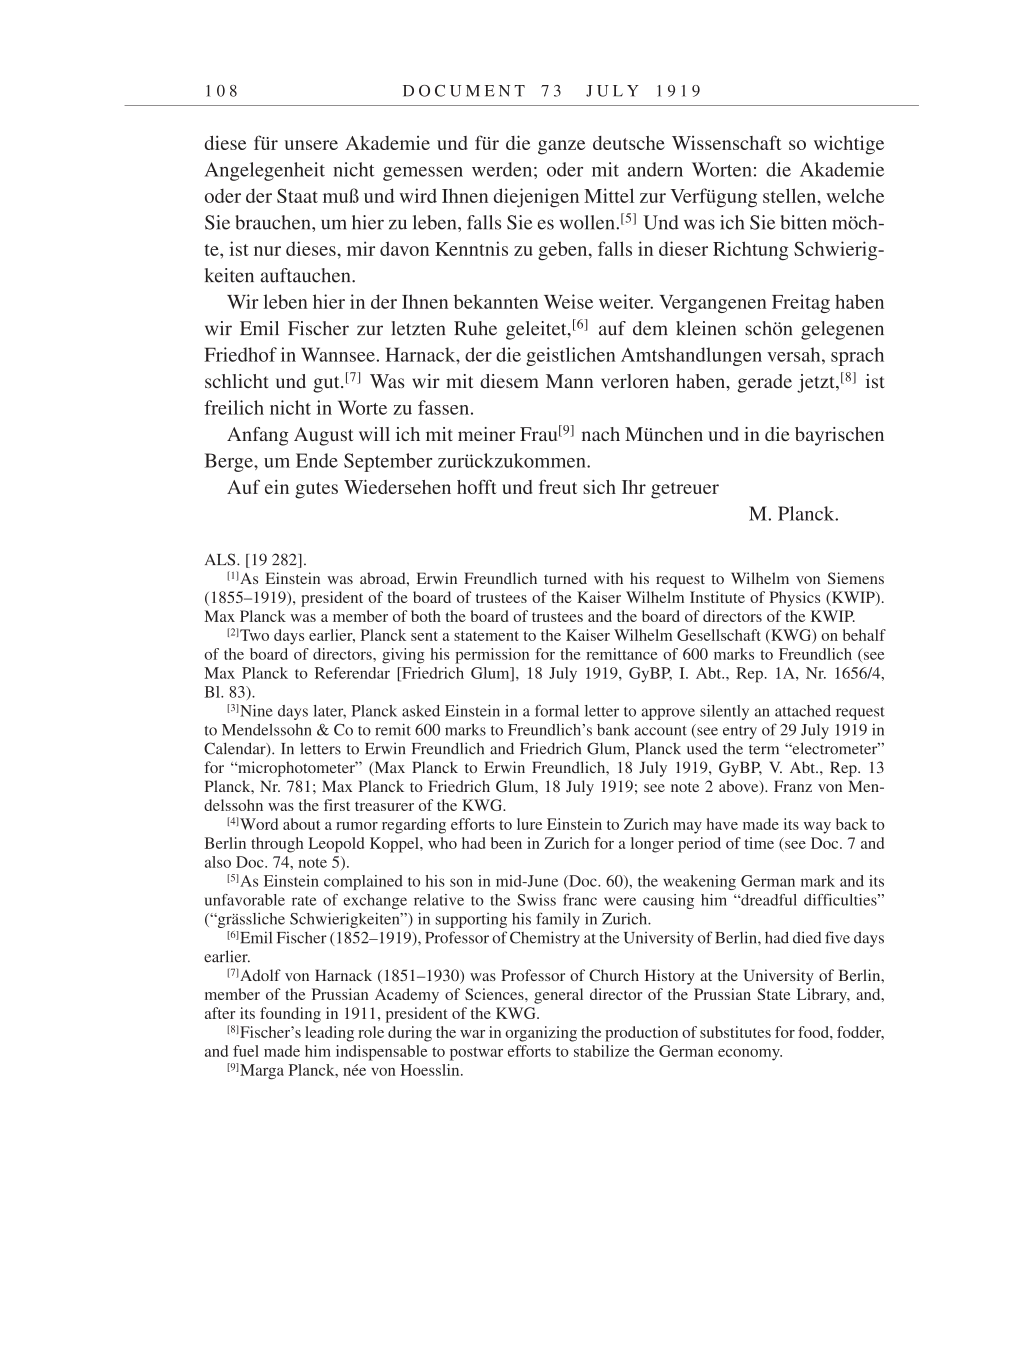 Volume 9: The Berlin Years: Correspondence January 1919-April 1920 page 108